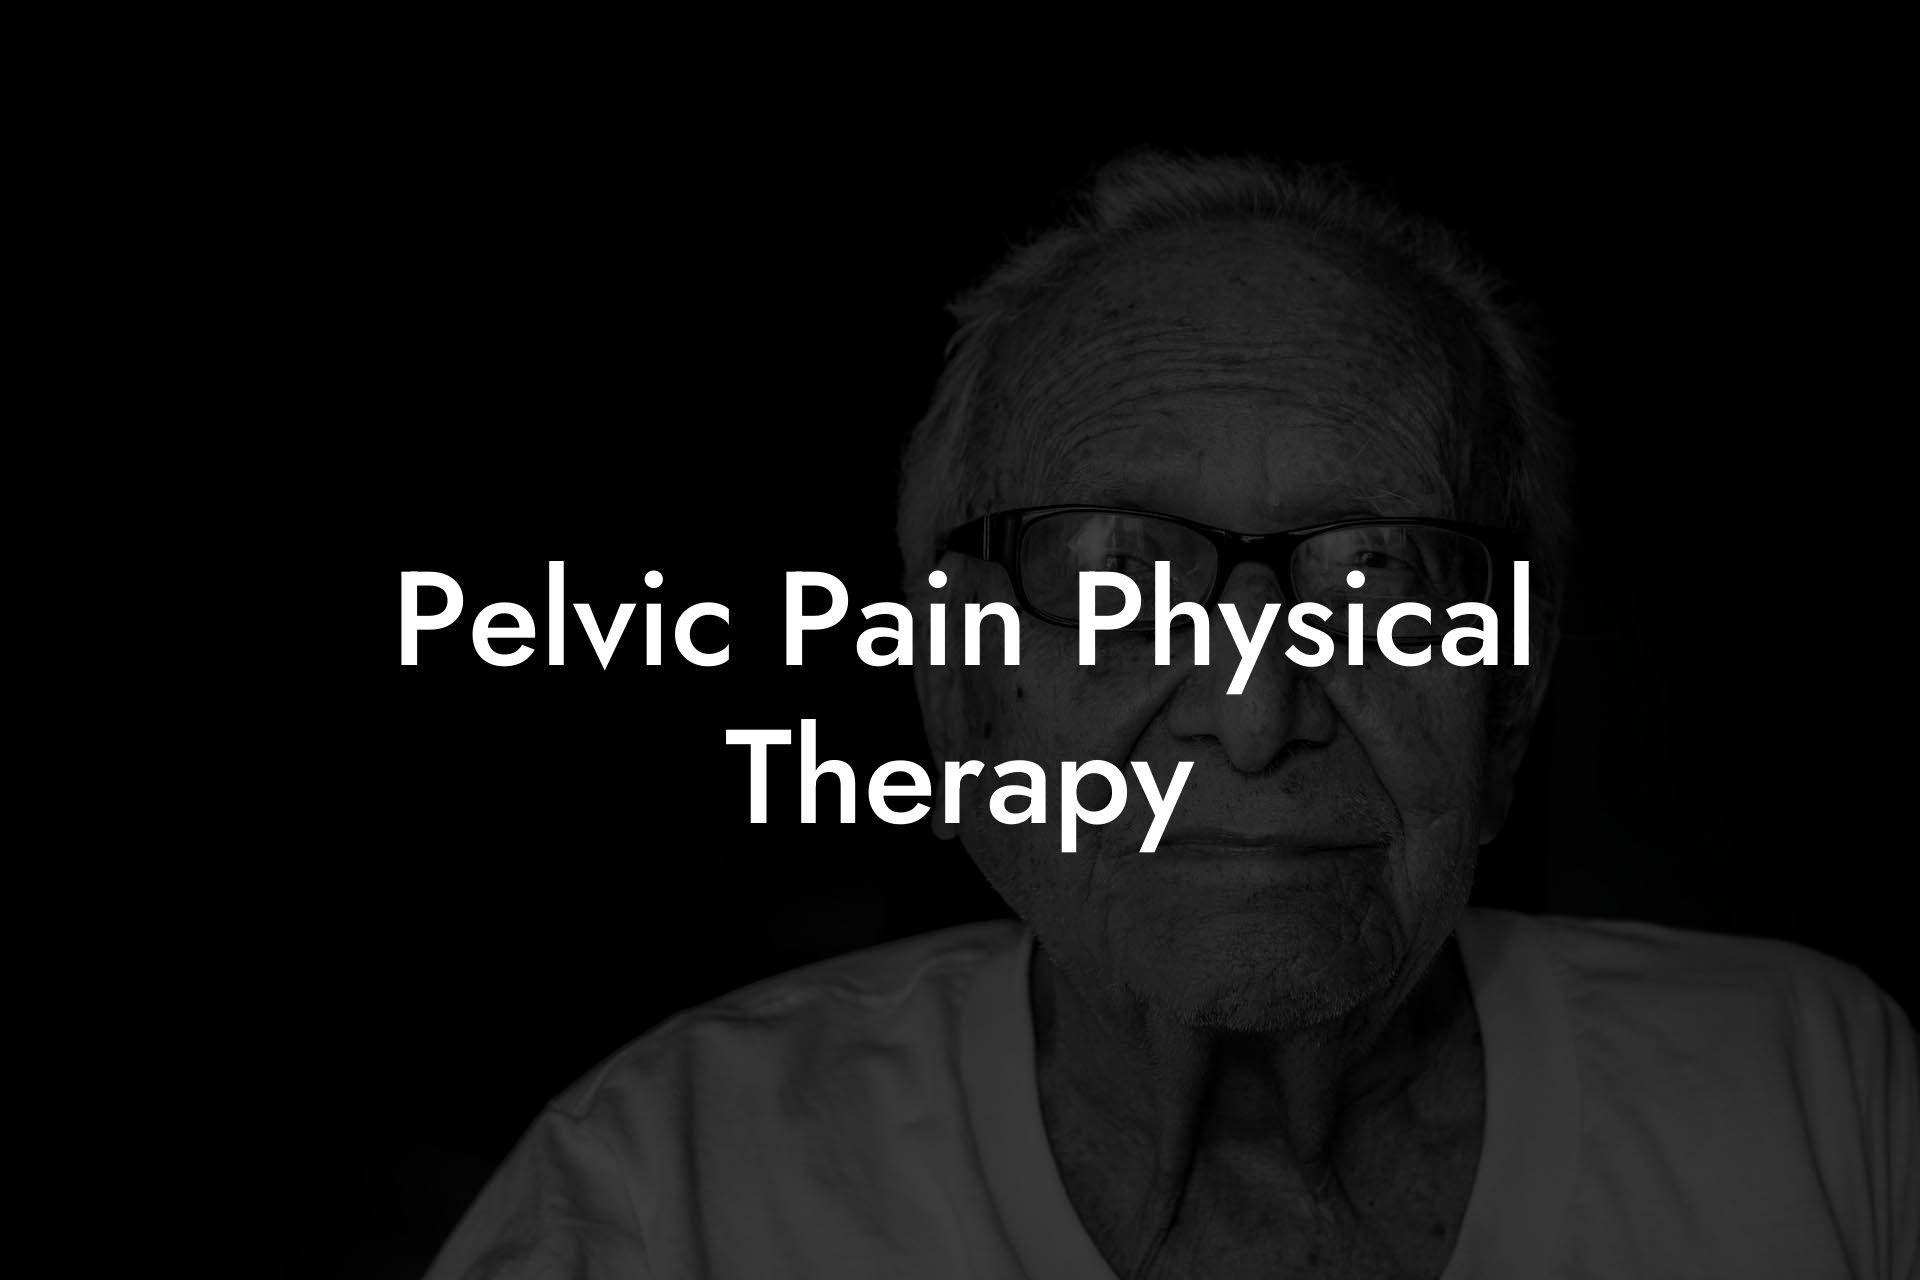 Pelvic Pain Physical Therapy